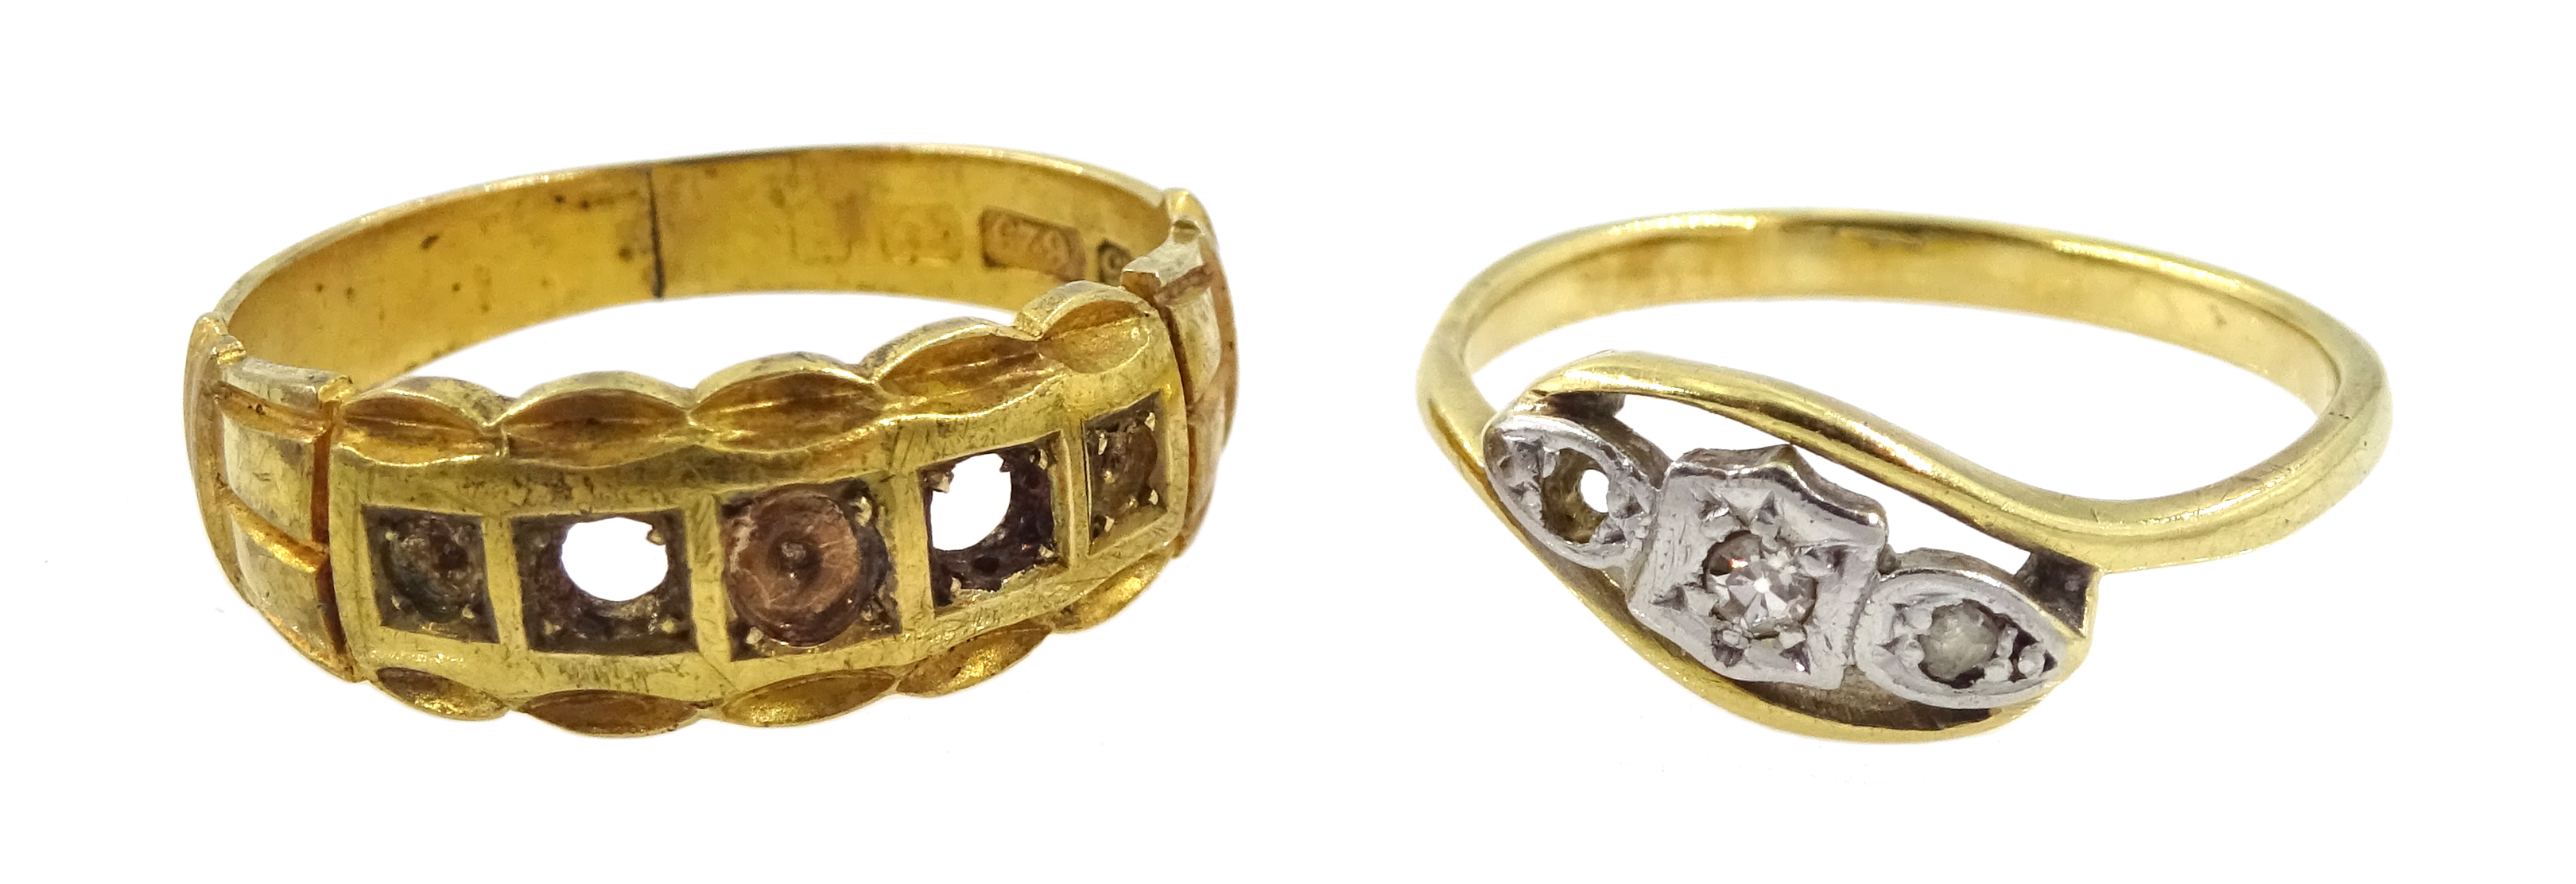 15ct gold ring hallmarked, 18ct gold diamond set ring and an early 20th century 9ct rose gold ladies - Image 6 of 9